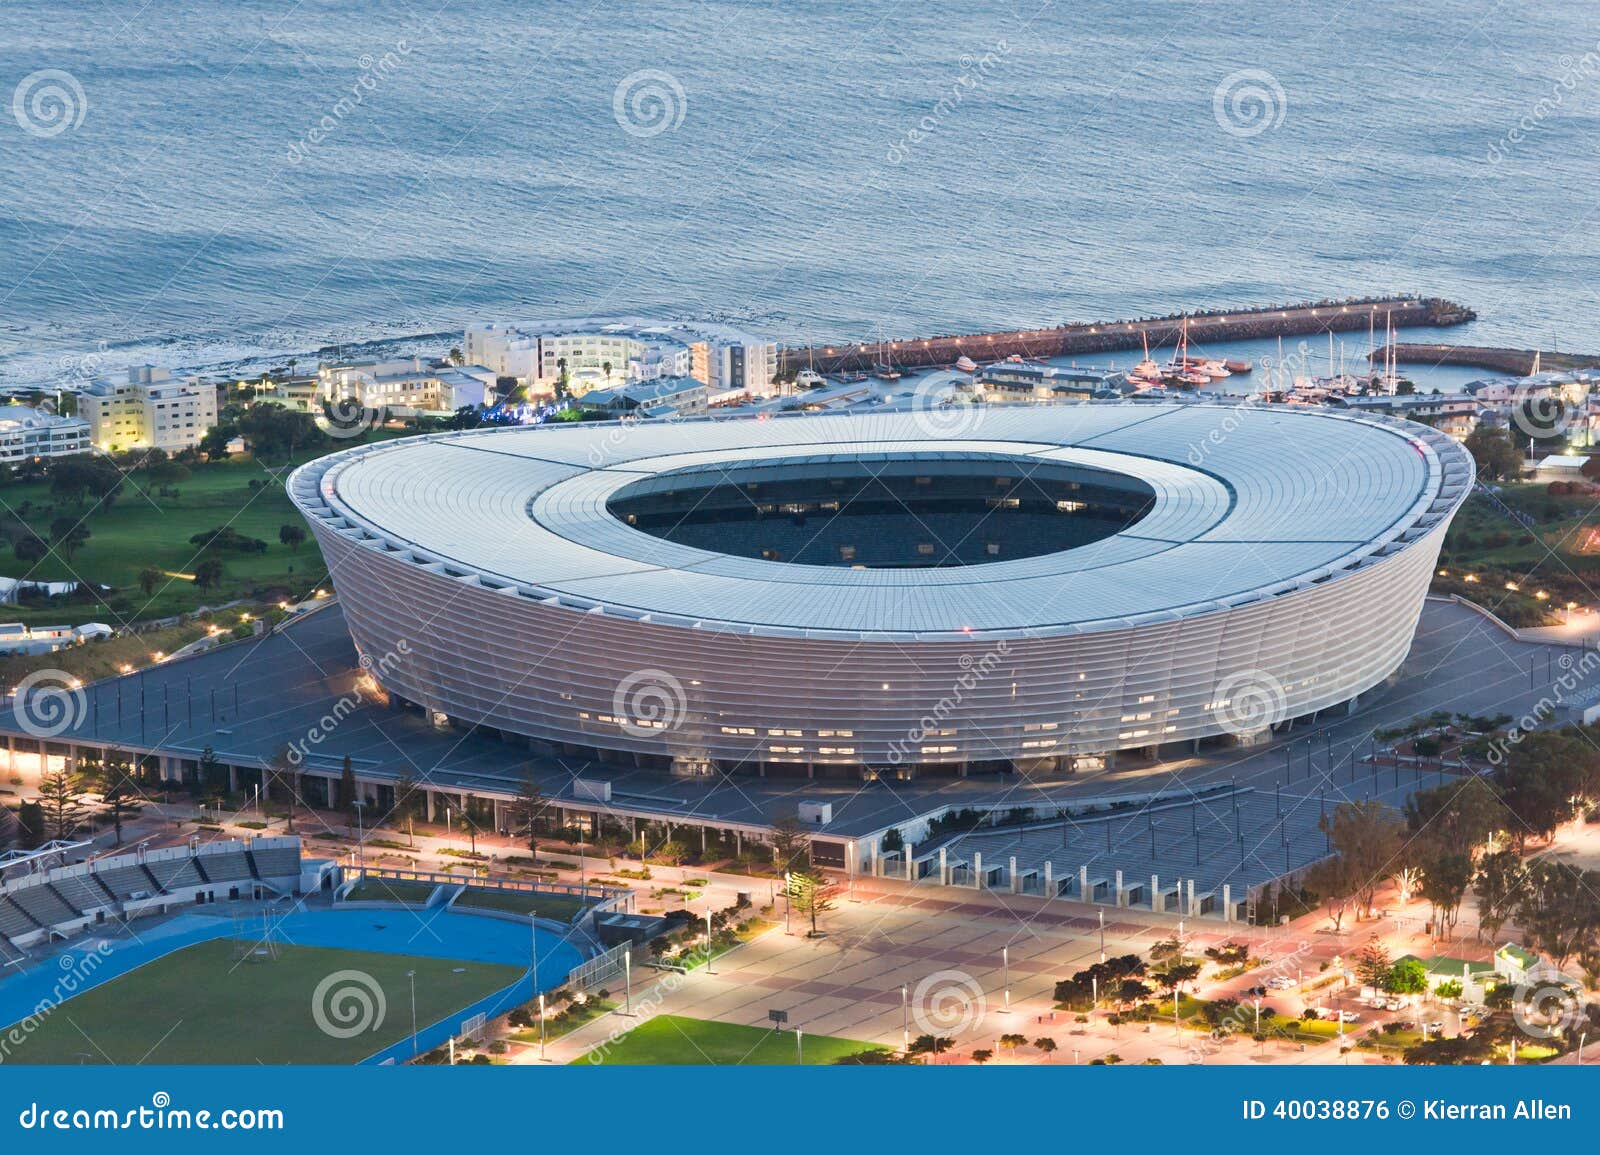 greenpoint stadium capetown south africa